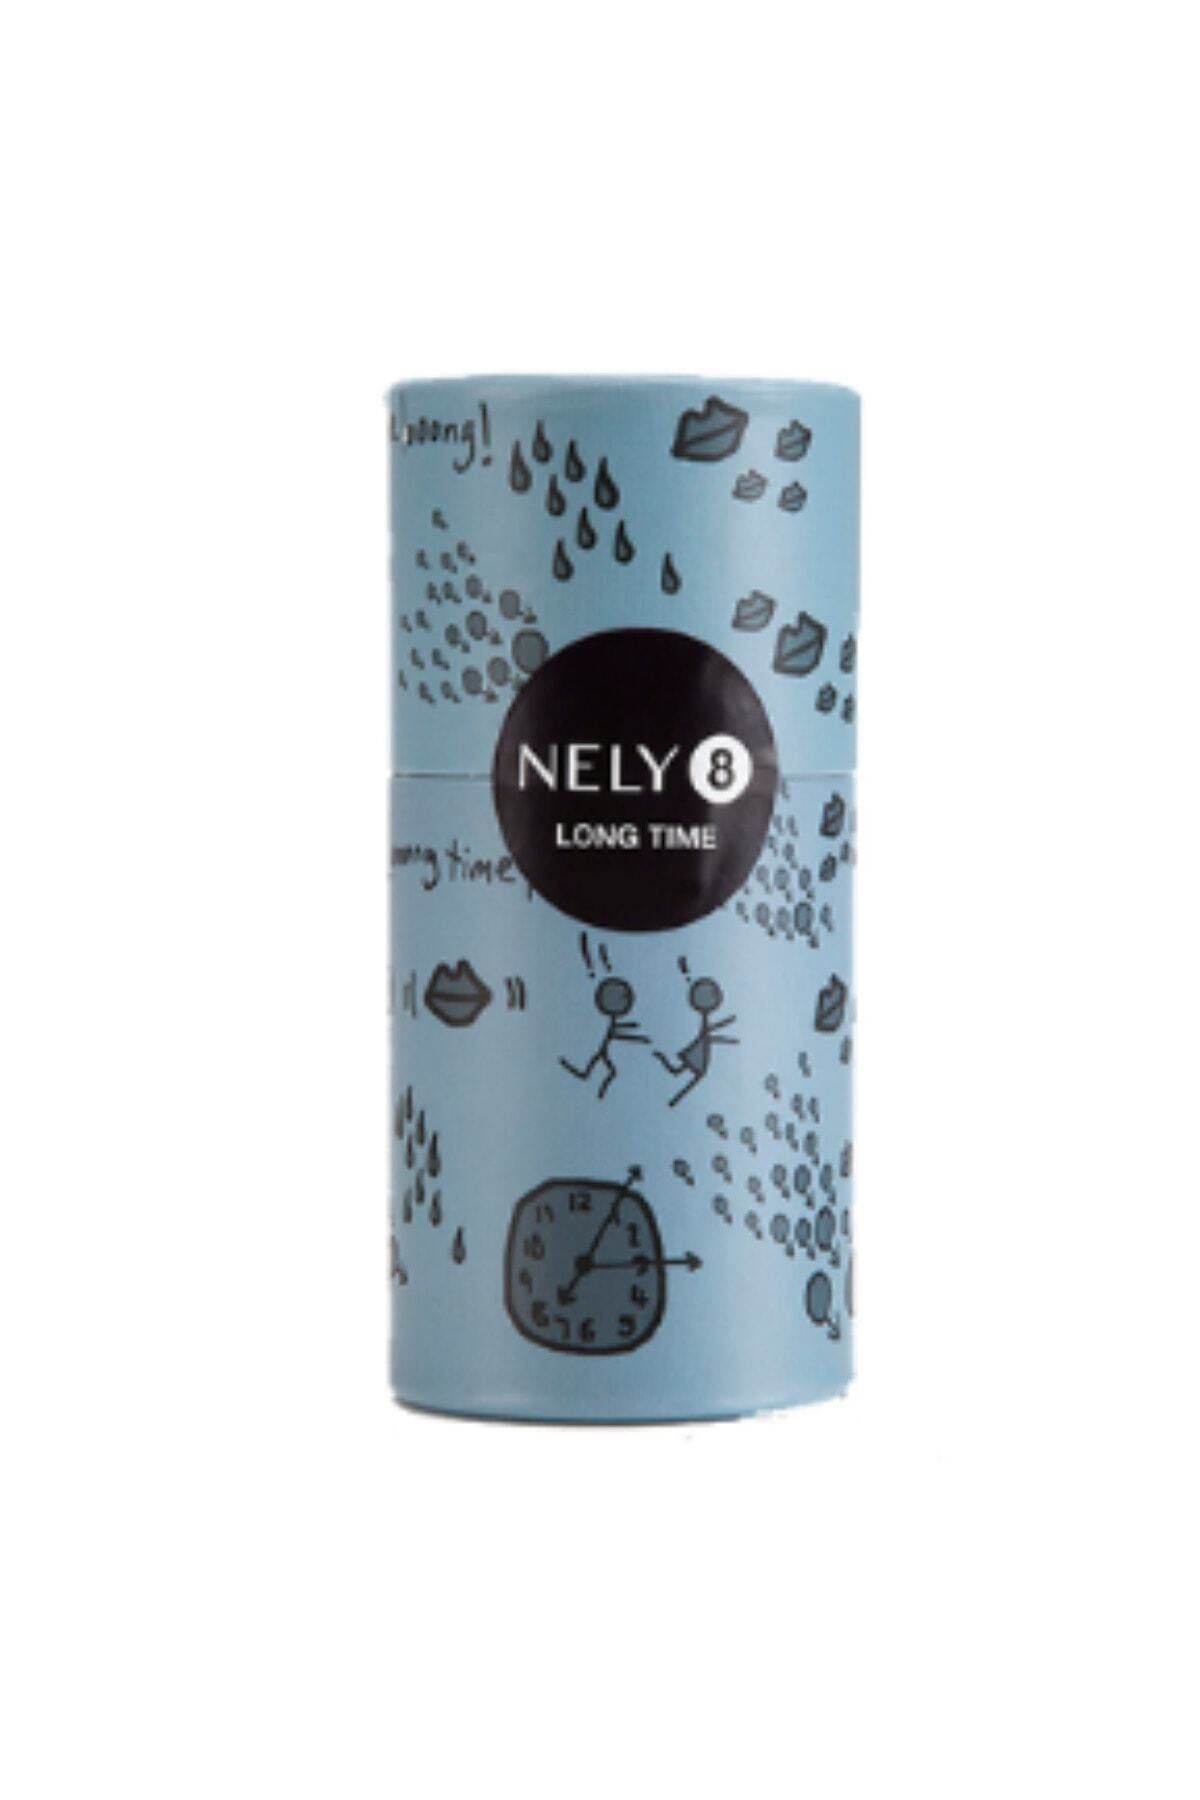 Nely8 Long Time 10ad. X 1.5 ml